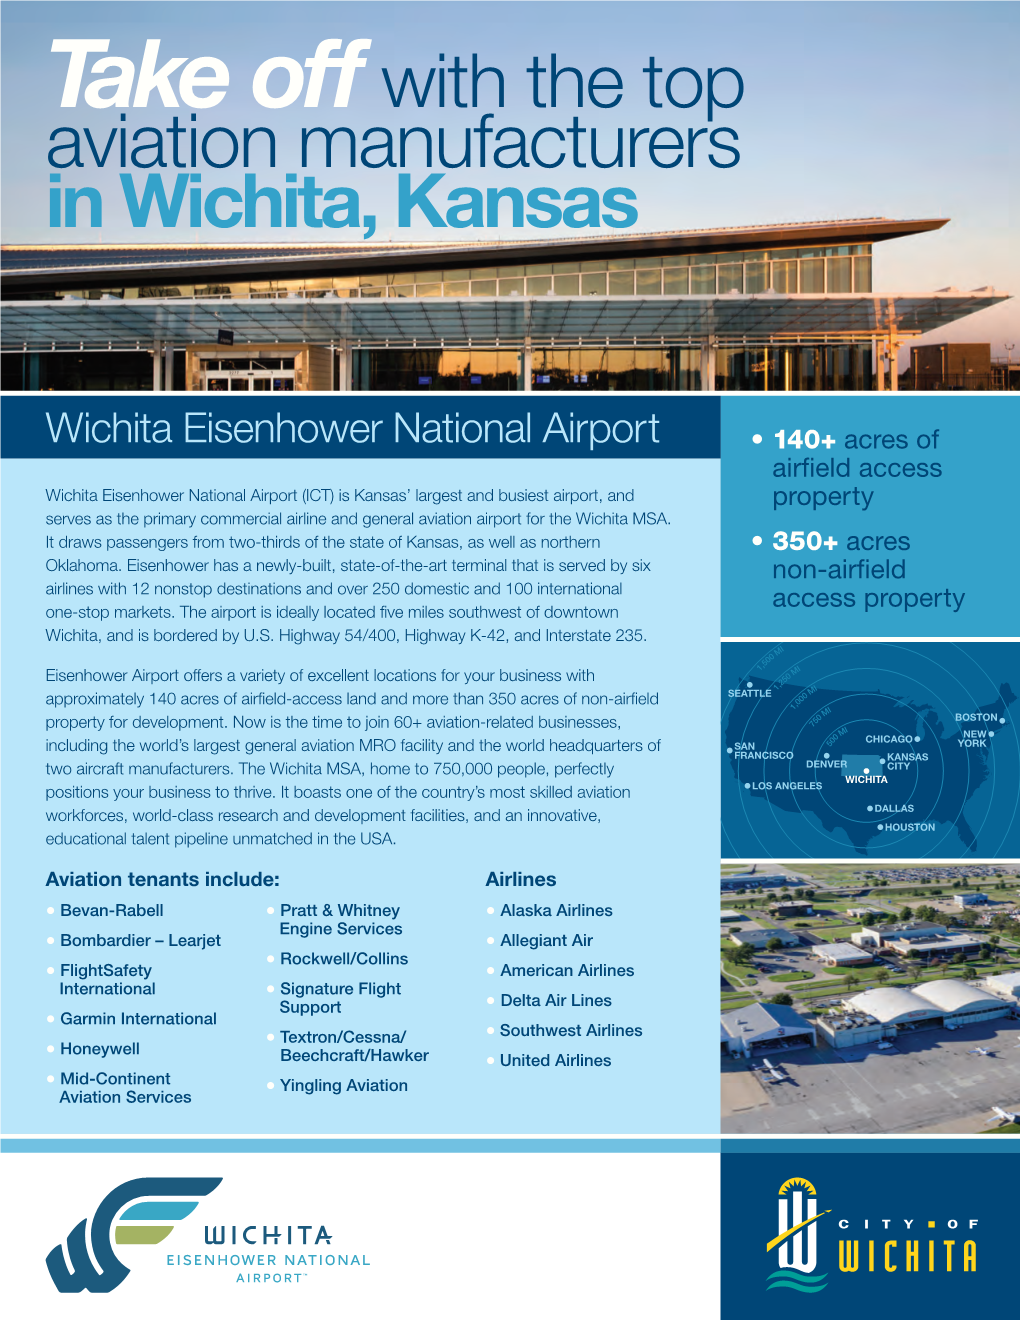 Take Offwith the Top Aviation Manufacturers in Wichita, Kansas